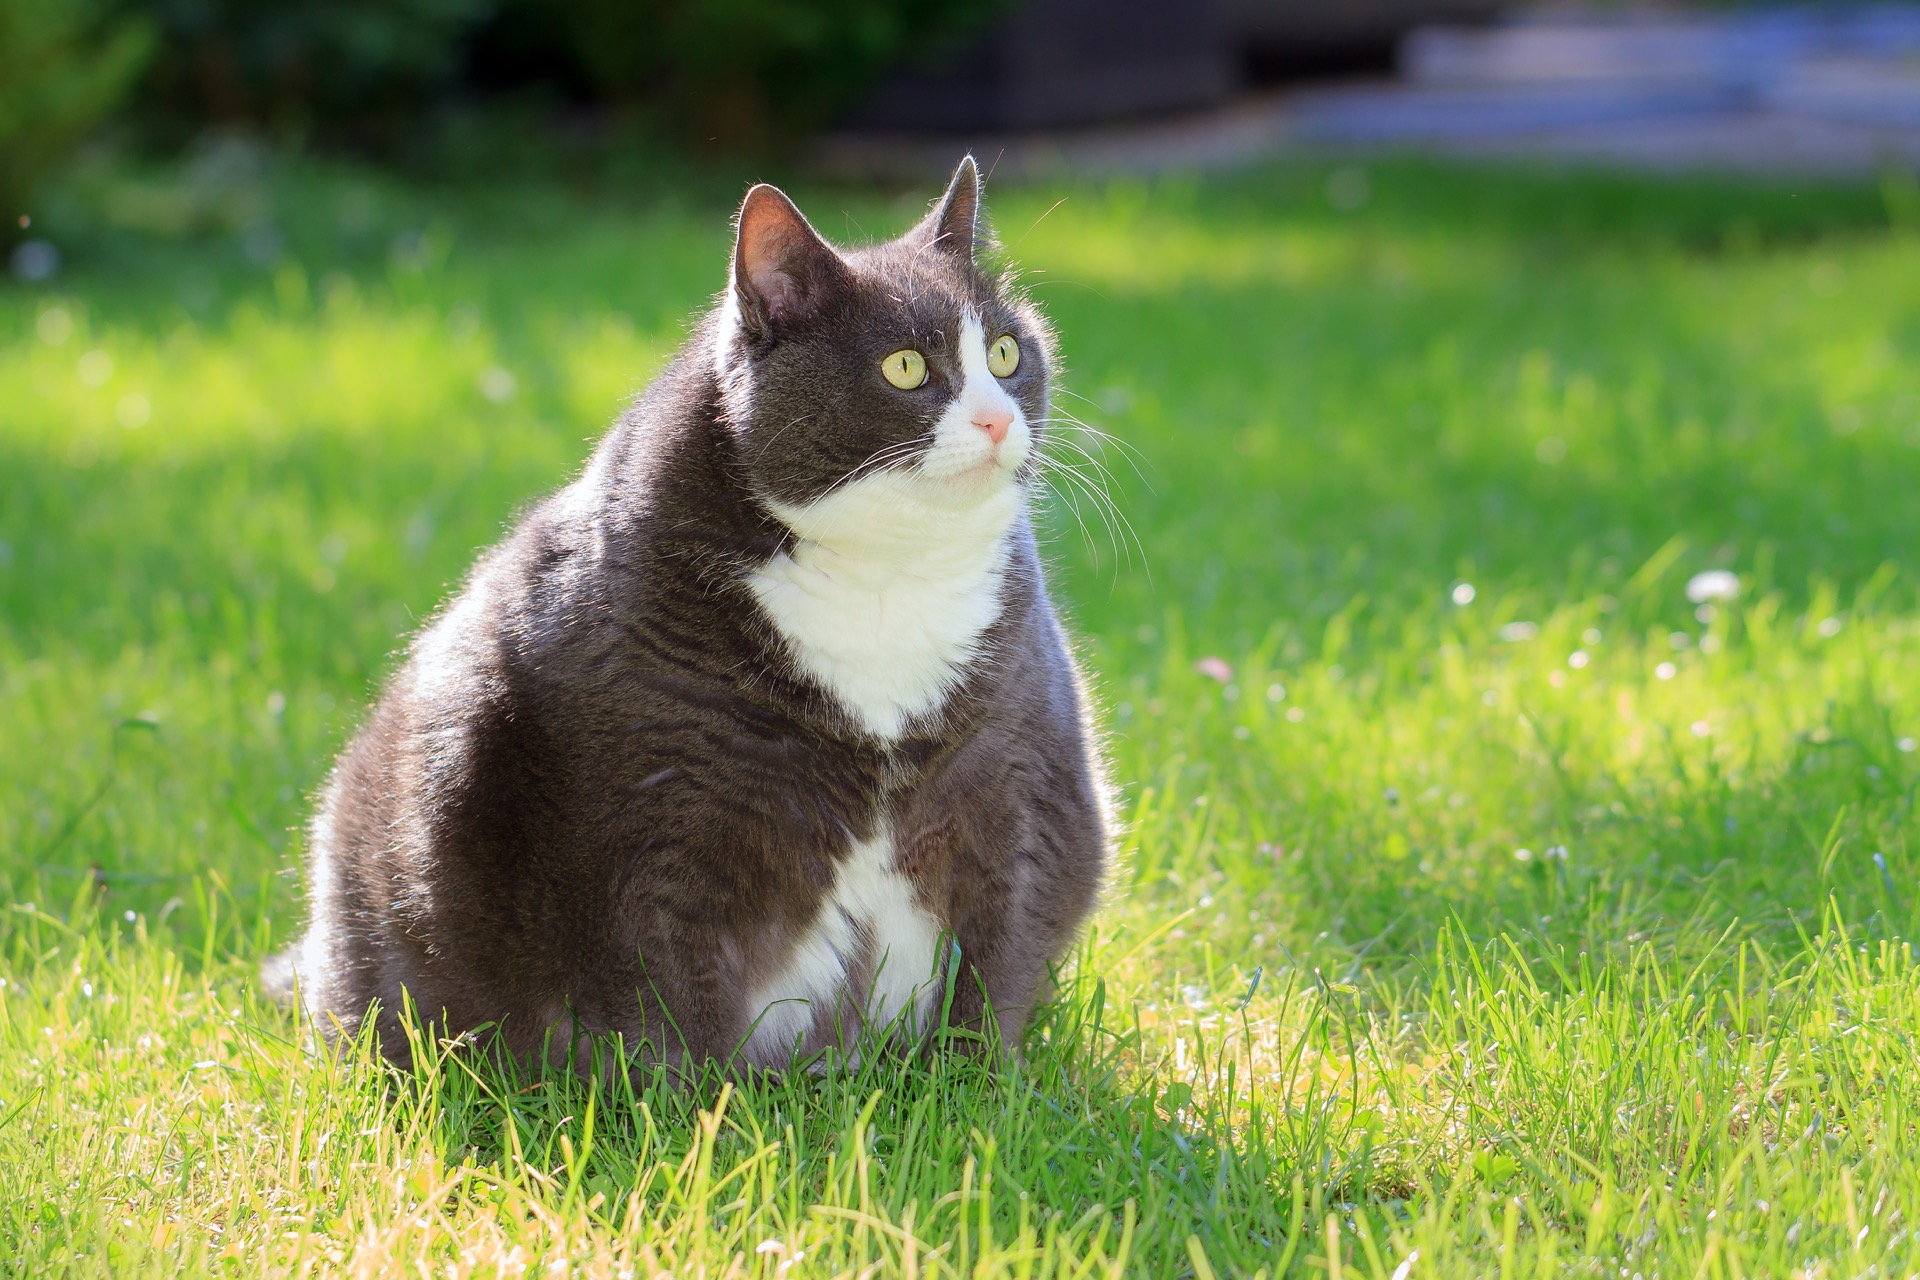 Is Your Cat Overweight? These Are Some Clear Signs They Are